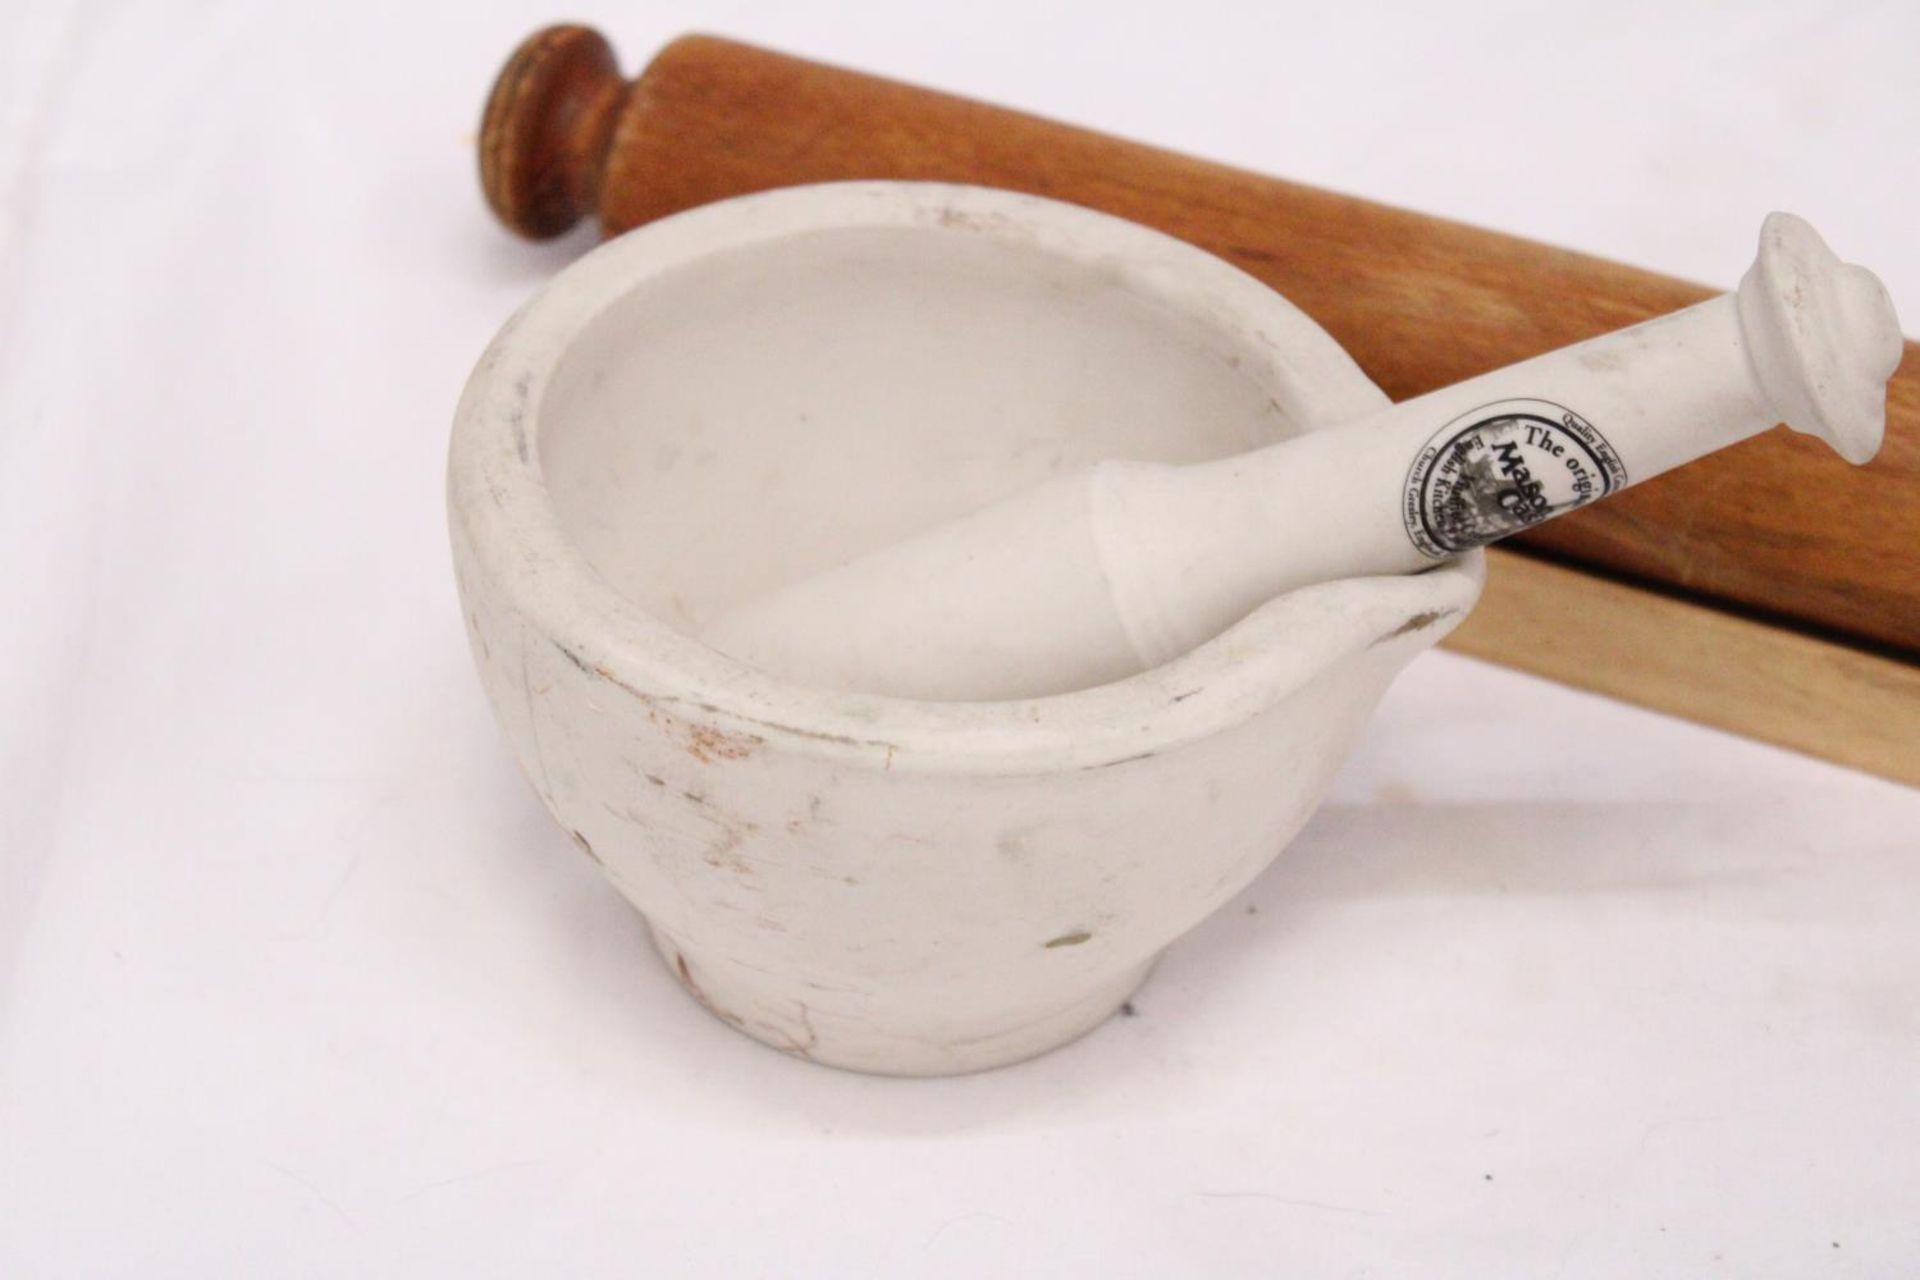 A MASON CASH CERAMIC PESTLE AND MORTAR AND A 'GOURMET' ROLLING PIN AND STAND - Image 2 of 4